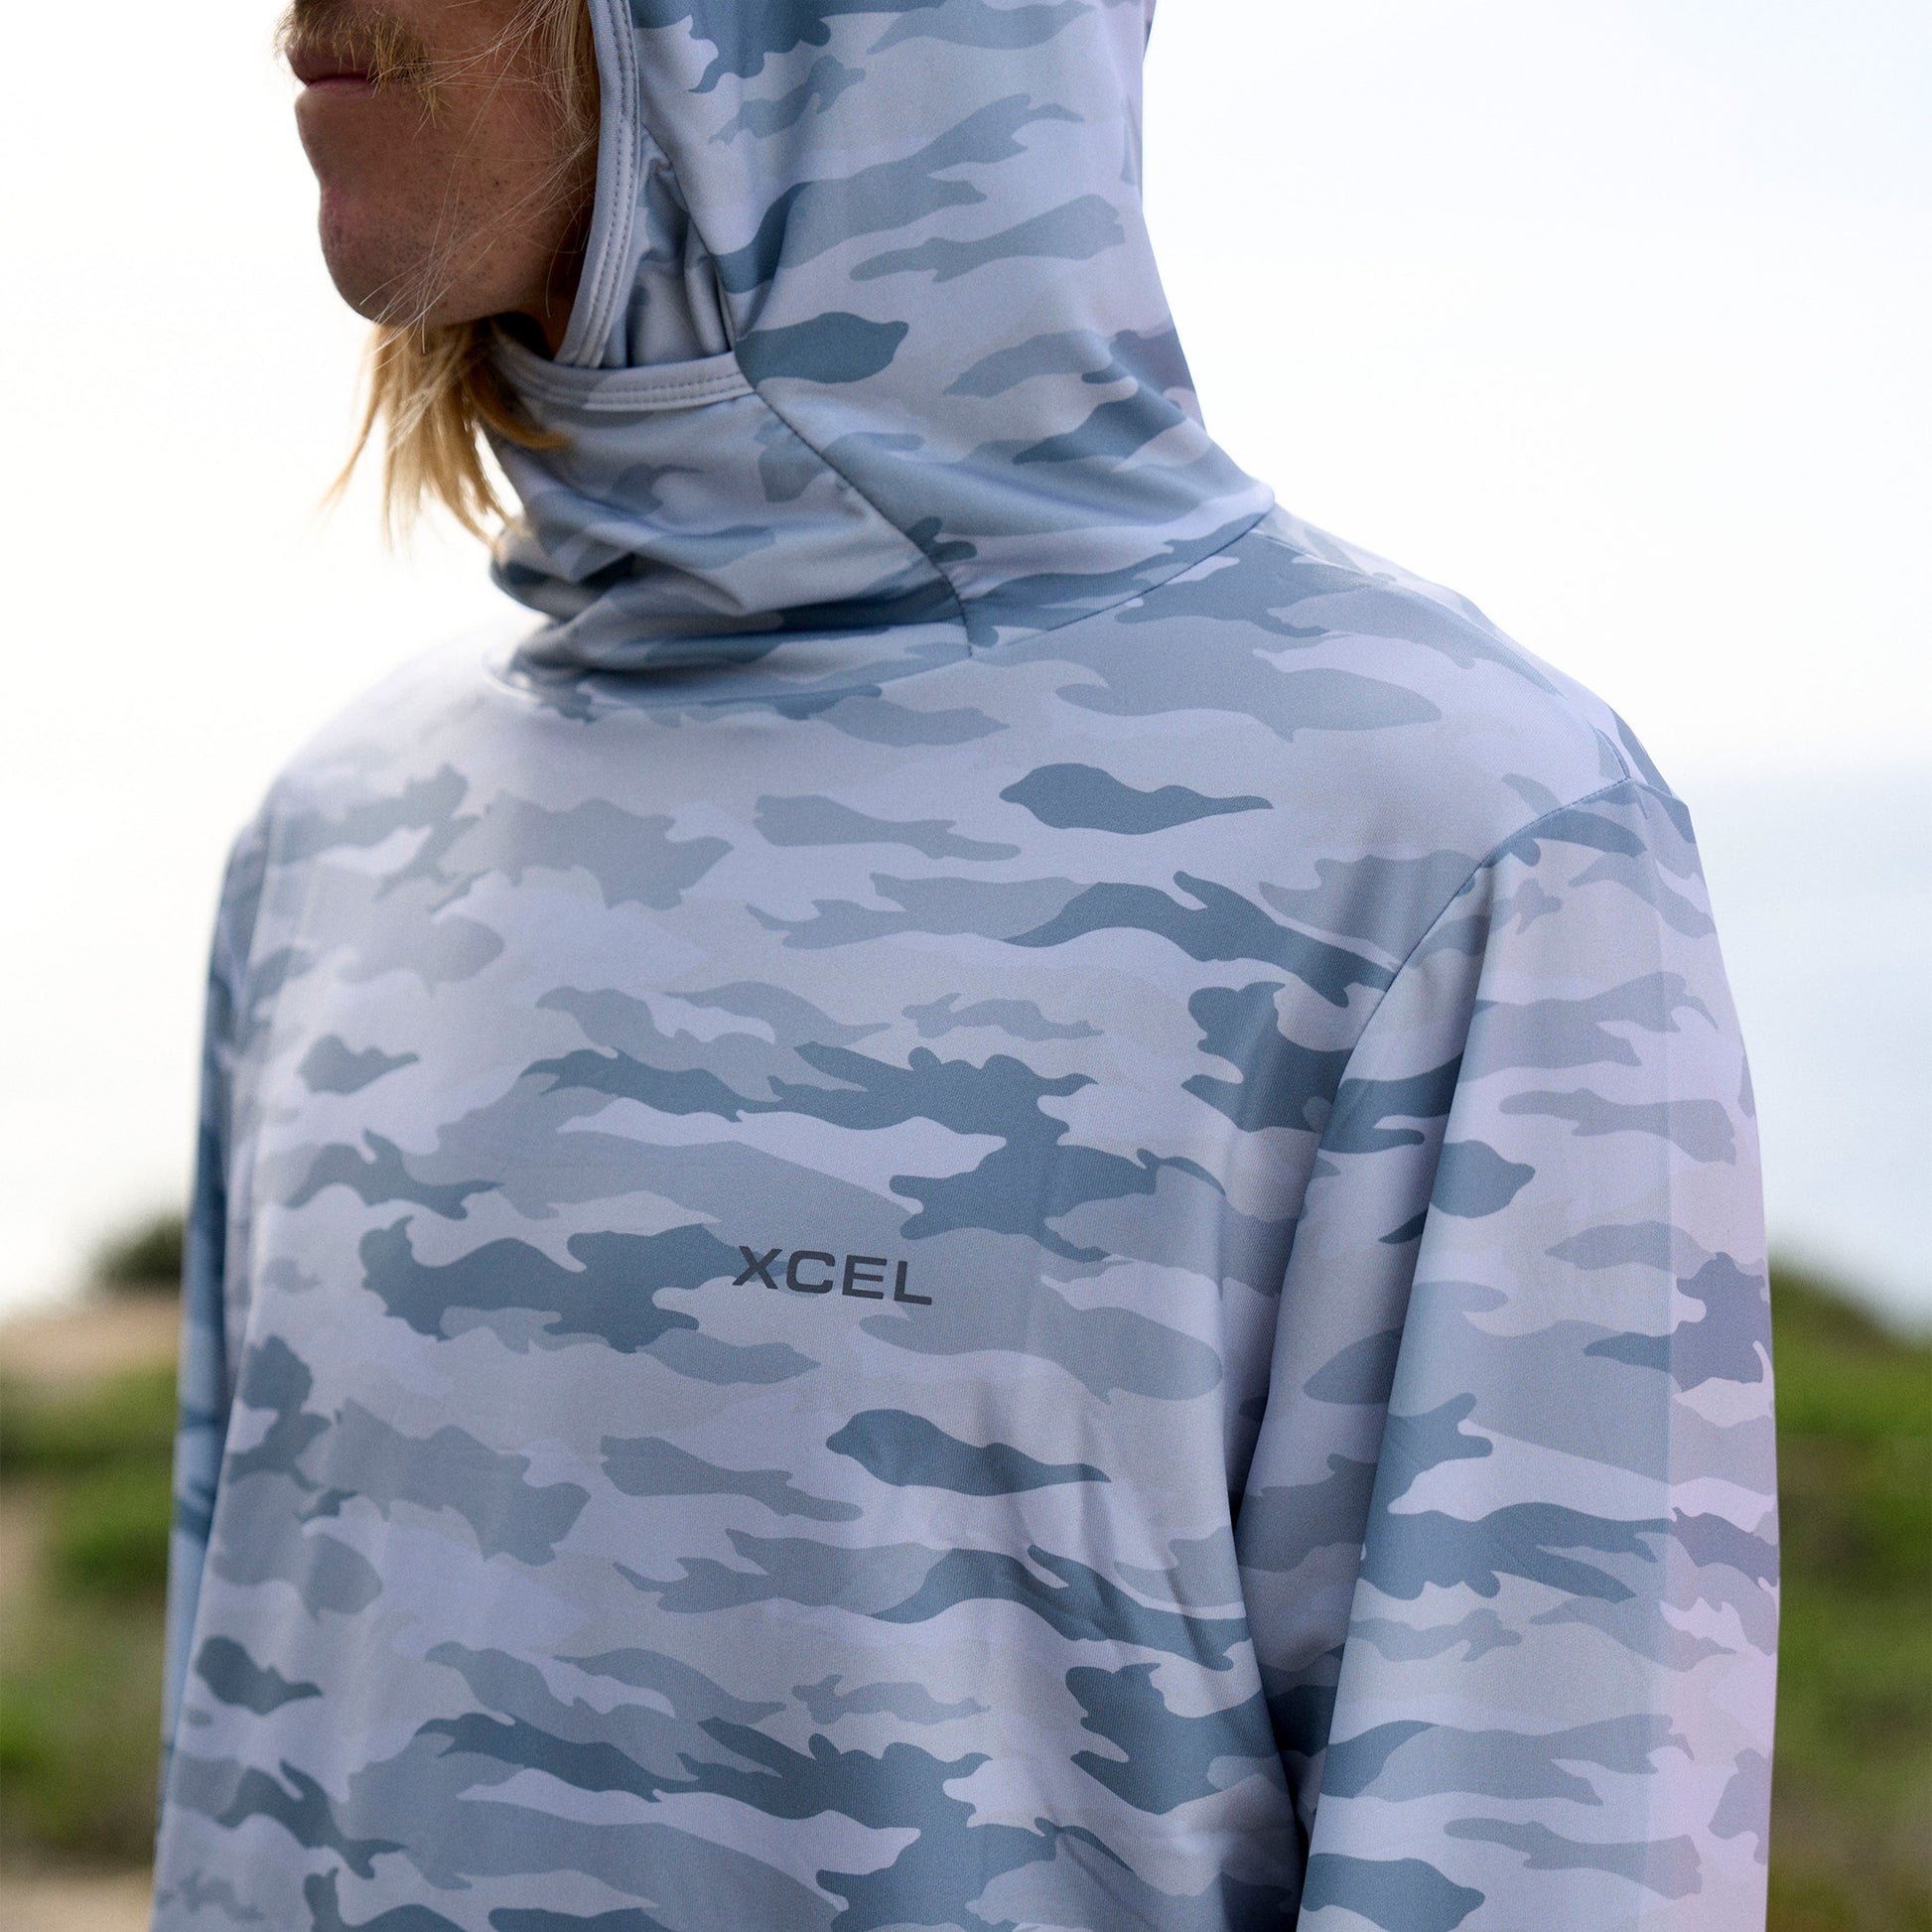 Xcel | Men's ThreadX Hooded Pullover Long Sleeve Fishing Shirt W/Iceskin Facecover | M / White Camo